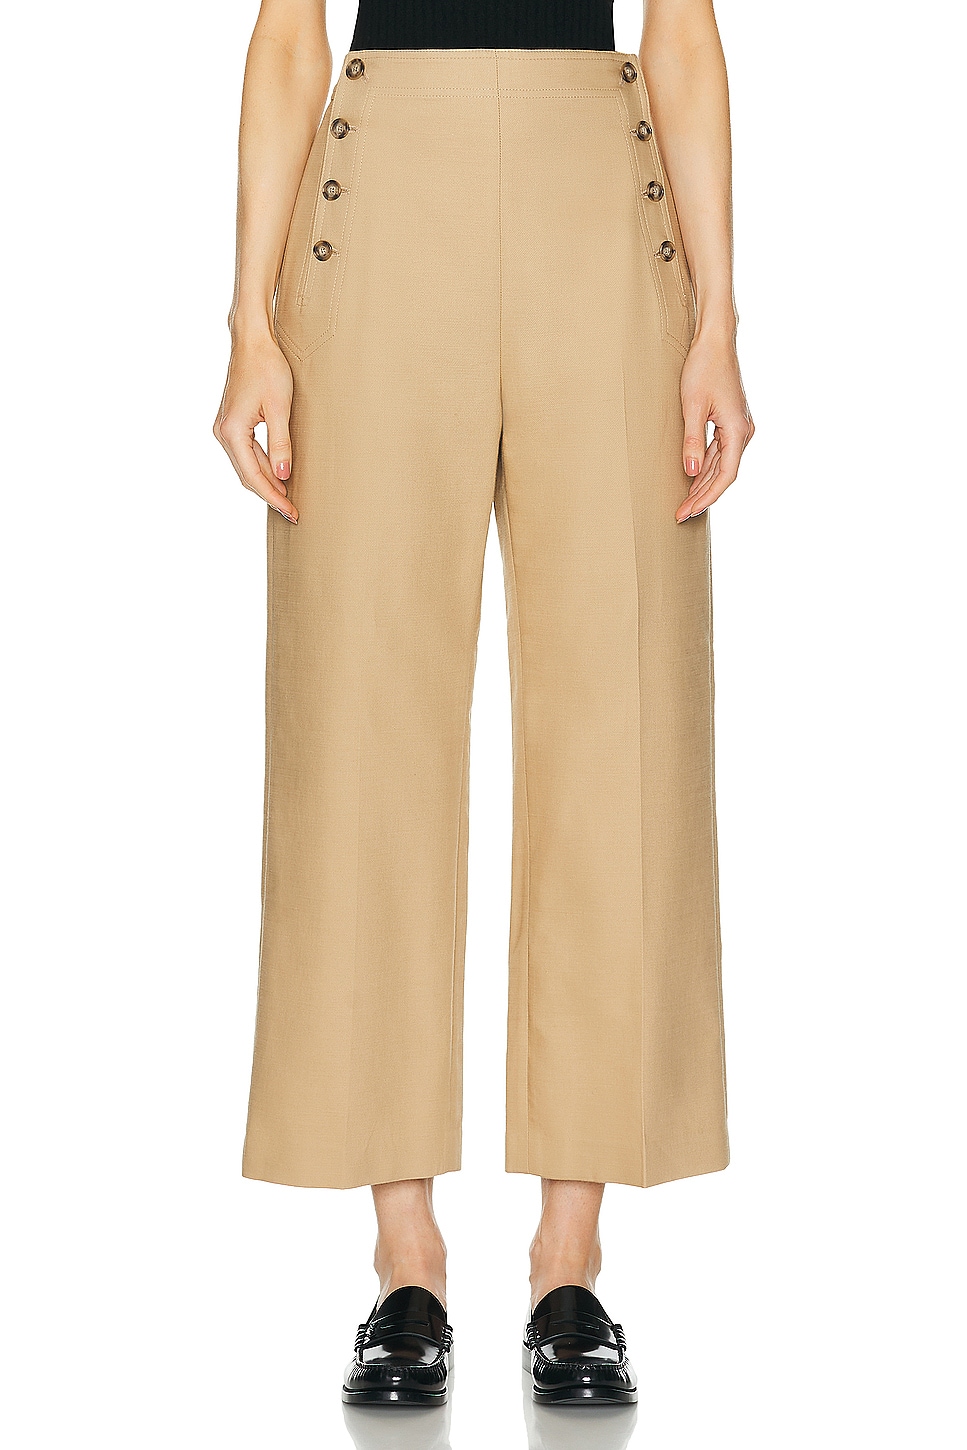 Image 1 of Polo Ralph Lauren Wide Leg Cropped Pant in Monument Tan